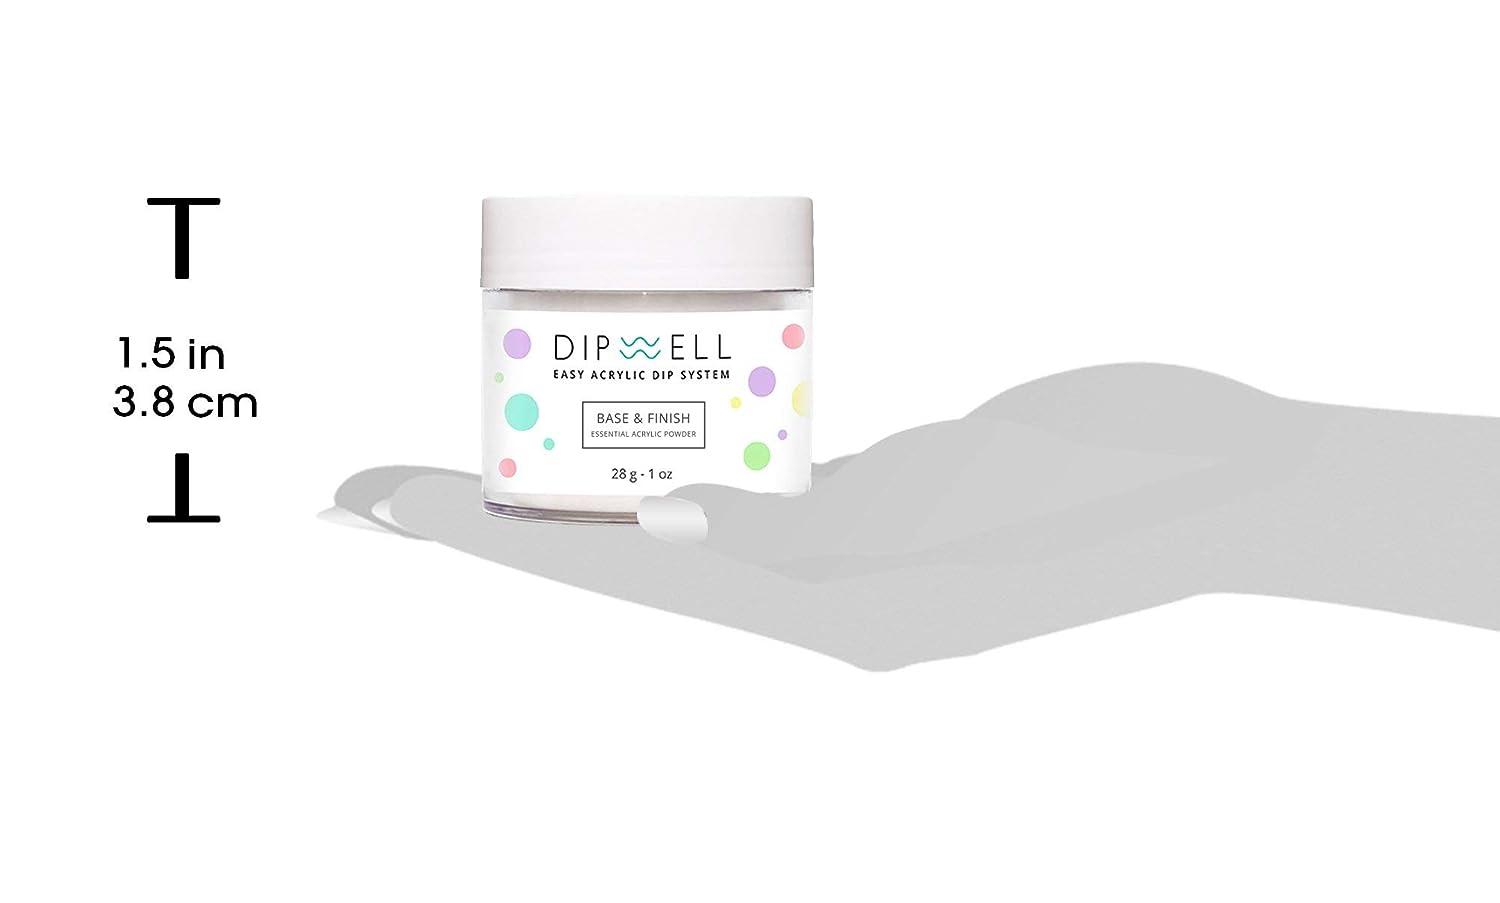 Nail Dip Powder, Glitter Color Collection, Dipping Acrylic for Any Kit or System by DipWell, Size: 1 oz, GL - 08